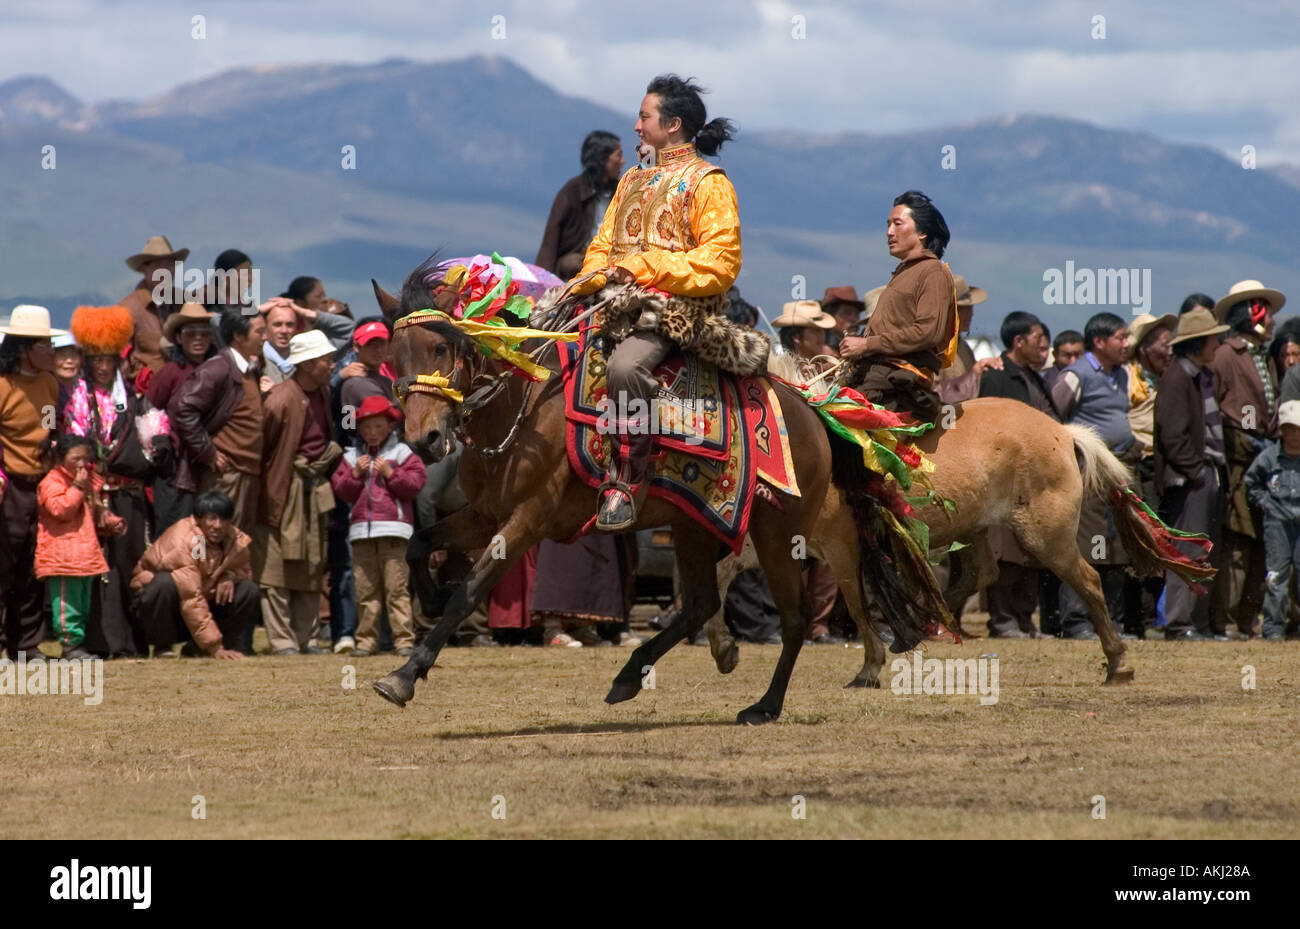 A Khampa participates in the dressage competition at the Litang Horse Festival in Kham Sichuan Province China Tibet  Stock Photo